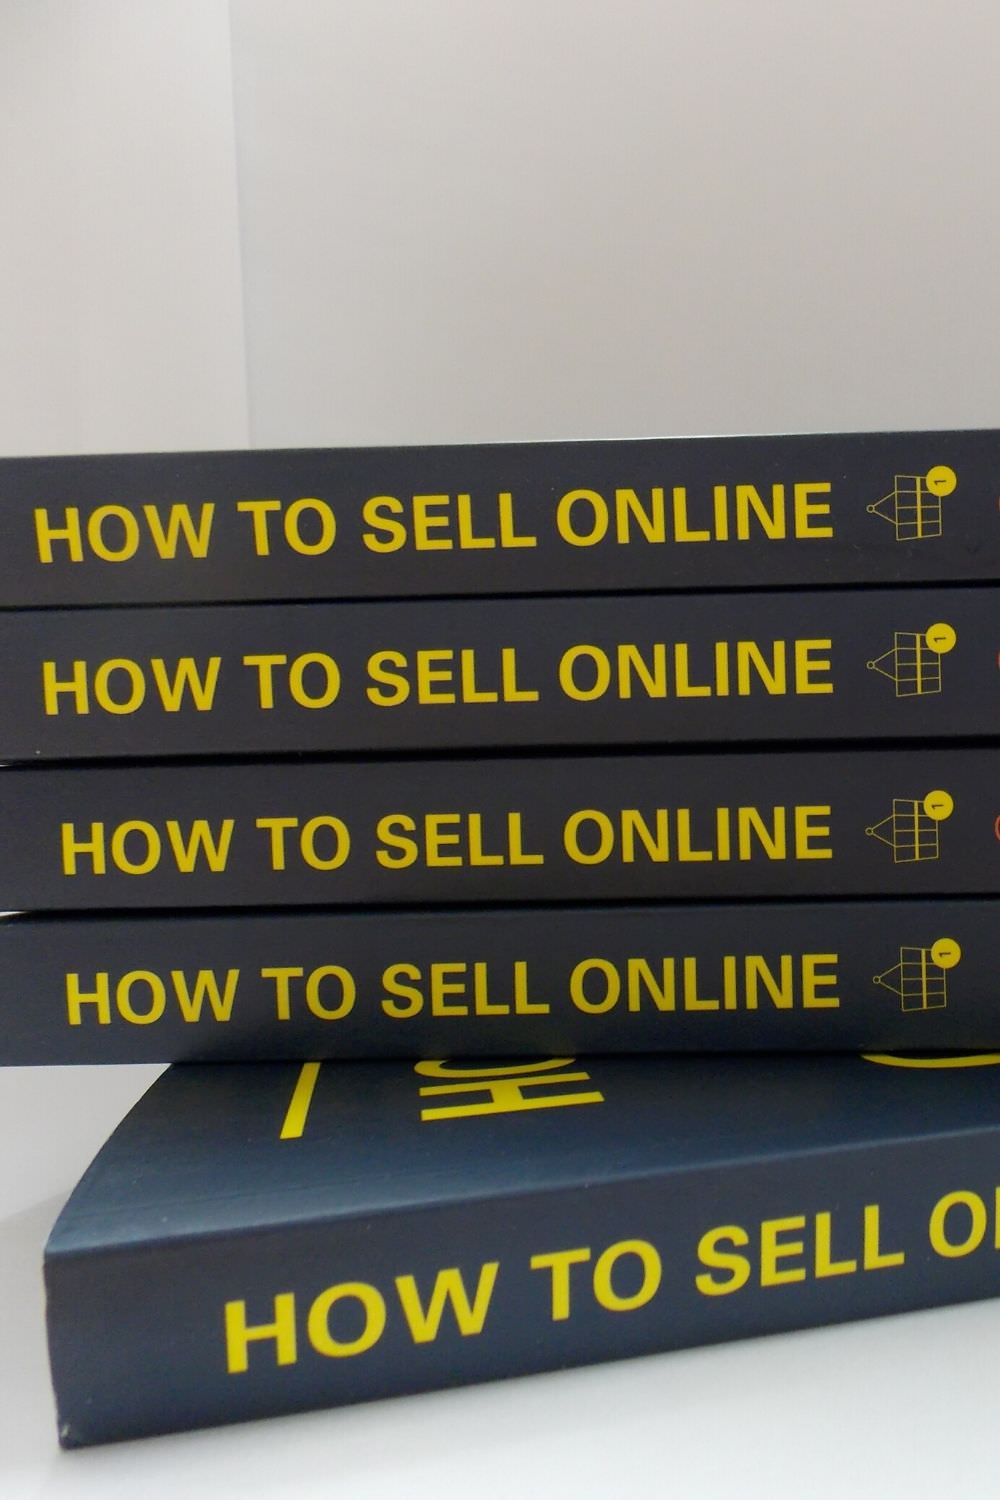 How to sell online books stacked up